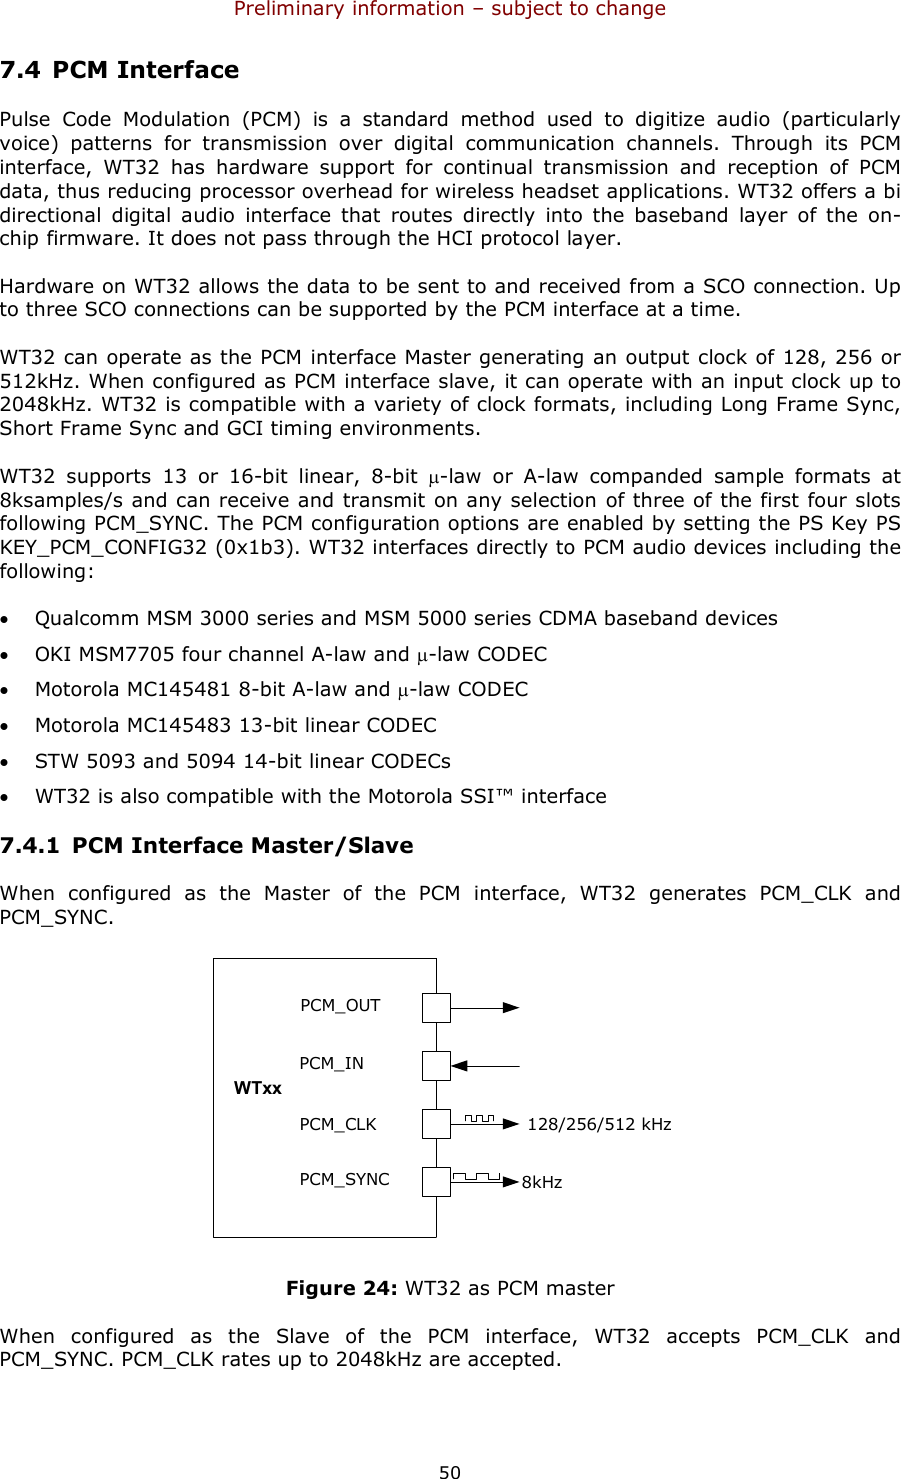 Preliminary information – subject to change  50 7.4 PCM Interface Pulse  Code  Modulation  (PCM)  is  a  standard  method  used  to  digitize  audio  (particularly voice)  patterns  for  transmission  over  digital  communication  channels.  Through  its  PCM interface,  WT32  has  hardware  support  for  continual  transmission  and  reception  of  PCM data, thus reducing processor overhead for wireless headset applications. WT32 offers a bi directional  digital  audio  interface  that  routes  directly  into  the  baseband  layer  of  the  on-chip firmware. It does not pass through the HCI protocol layer. Hardware on WT32 allows the data to be sent to and received from a SCO connection. Up to three SCO connections can be supported by the PCM interface at a time. WT32 can operate as the PCM interface Master generating an output clock of 128, 256 or 512kHz. When configured as PCM interface slave, it can operate with an input clock up to 2048kHz. WT32 is compatible with a variety of clock formats, including Long Frame Sync, Short Frame Sync and GCI timing environments. WT32  supports  13  or  16-bit  linear,  8-bit  µ-law  or  A-law  companded  sample  formats  at 8ksamples/s and can receive and transmit on any selection of three of the first four slots following PCM_SYNC. The PCM configuration options are enabled by setting the PS Key PS KEY_PCM_CONFIG32 (0x1b3). WT32 interfaces directly to PCM audio devices including the following: • Qualcomm MSM 3000 series and MSM 5000 series CDMA baseband devices • OKI MSM7705 four channel A-law and µ-law CODEC • Motorola MC145481 8-bit A-law and µ-law CODEC • Motorola MC145483 13-bit linear CODEC • STW 5093 and 5094 14-bit linear CODECs • WT32 is also compatible with the Motorola SSI™ interface 7.4.1 PCM Interface Master/Slave When  configured  as  the  Master  of  the  PCM  interface,  WT32  generates  PCM_CLK  and PCM_SYNC. PCM_OUTPCM_INPCM_CLKPCM_SYNC 8kHz128/256/512 kHzWT12WTxx Figure 24: WT32 as PCM master When  configured  as  the  Slave  of  the  PCM  interface,  WT32  accepts  PCM_CLK  and PCM_SYNC. PCM_CLK rates up to 2048kHz are accepted. 